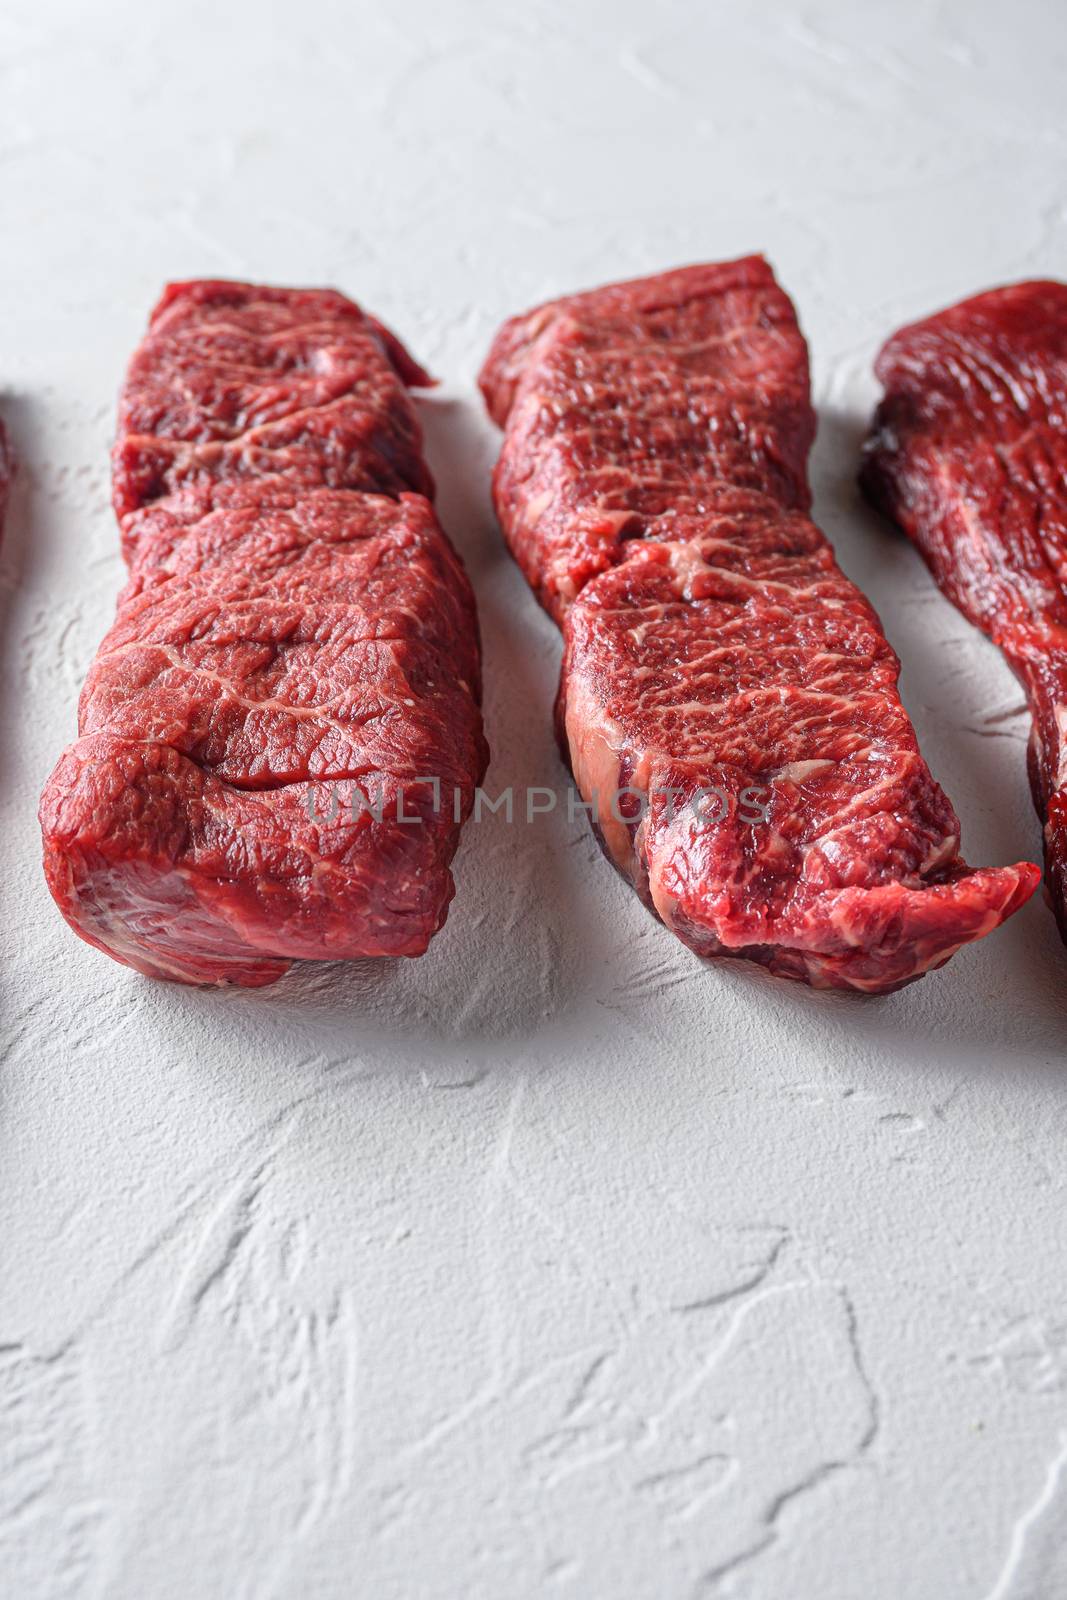 Raw denver steak cut organic meat cut side view close up over white concrete background vertical selective focus.